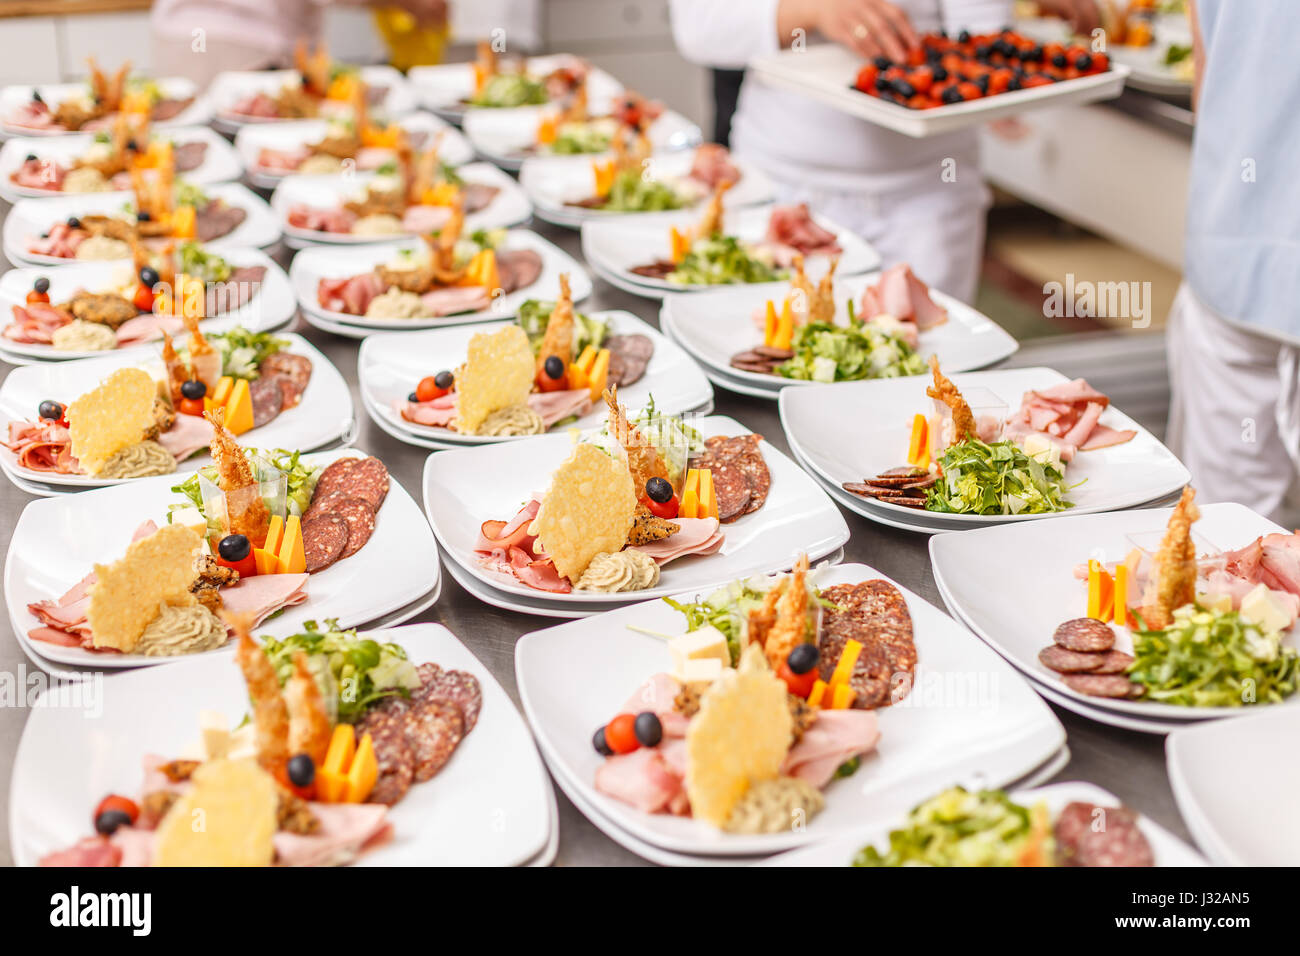 Lot of appetizer food plates in a restaurant kitchen. Stock Photo